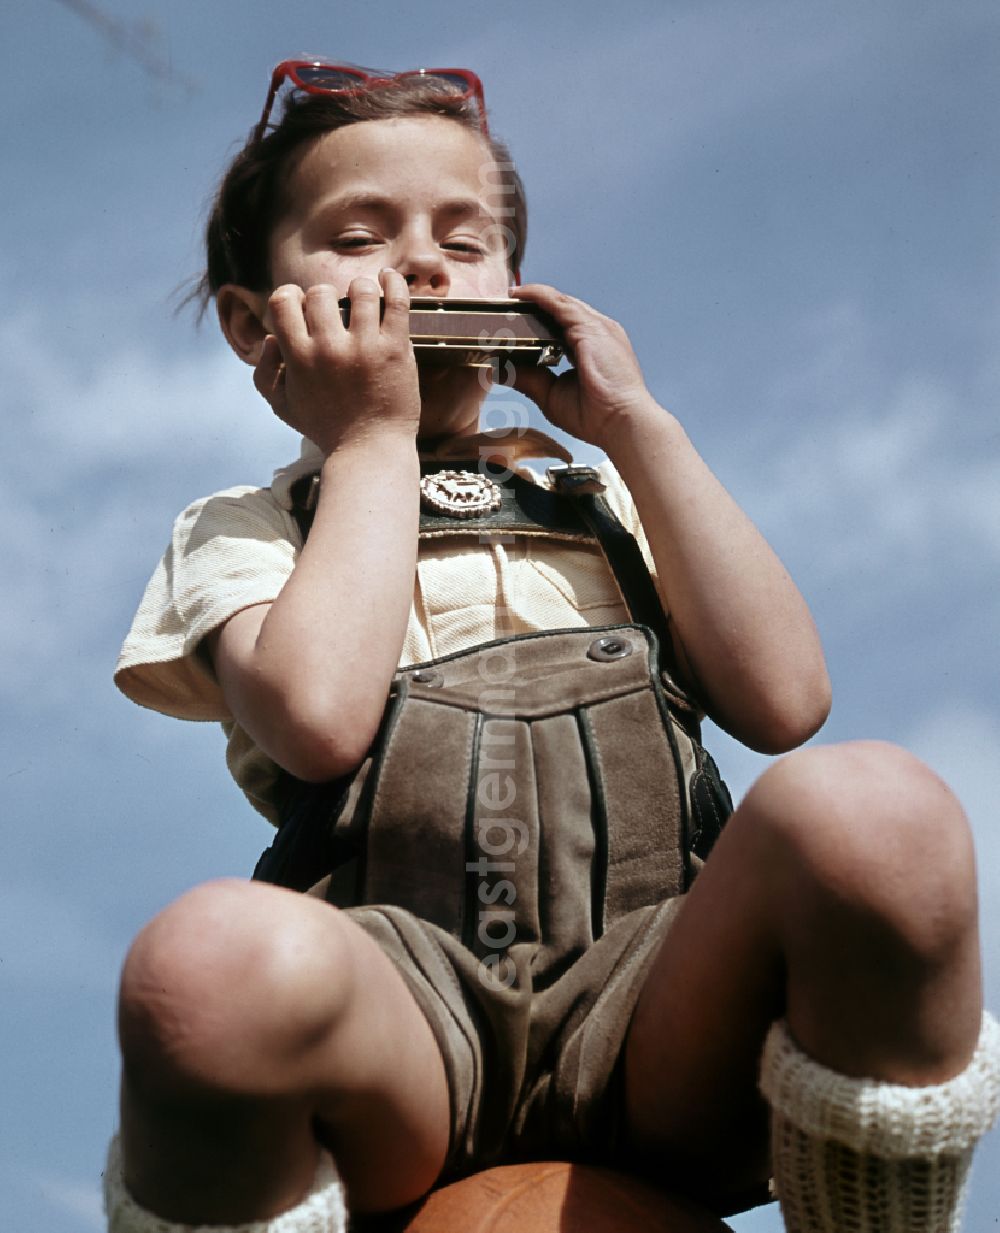 GDR image archive: Coswig - A little boy plays a harmonica in Coswig, Saxony in the territory of the former GDR, German Democratic Republic